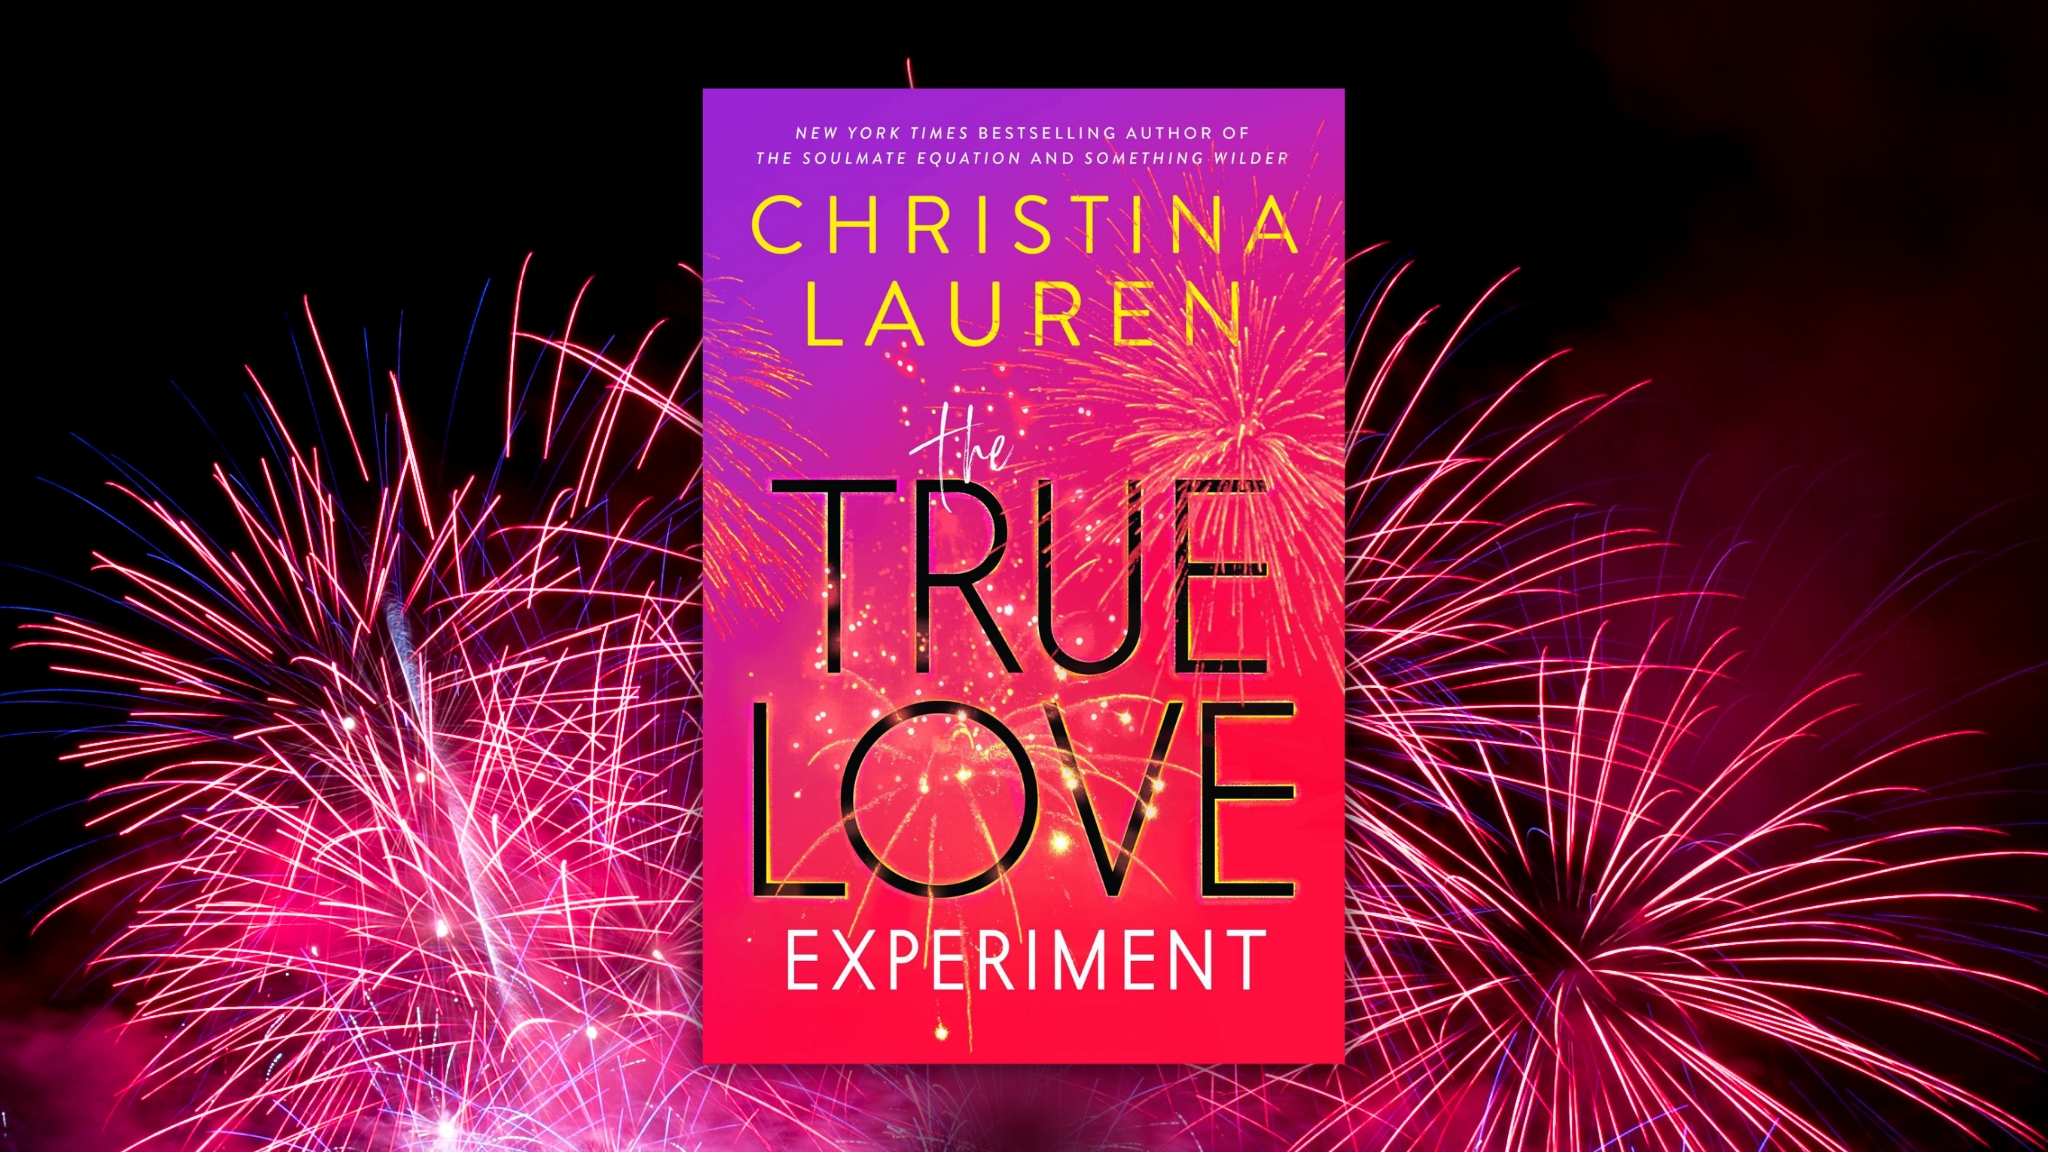 Romance Book-Ception, Forbidden Love and Delicious Angst in Latest Christina Lauren BookTrib.